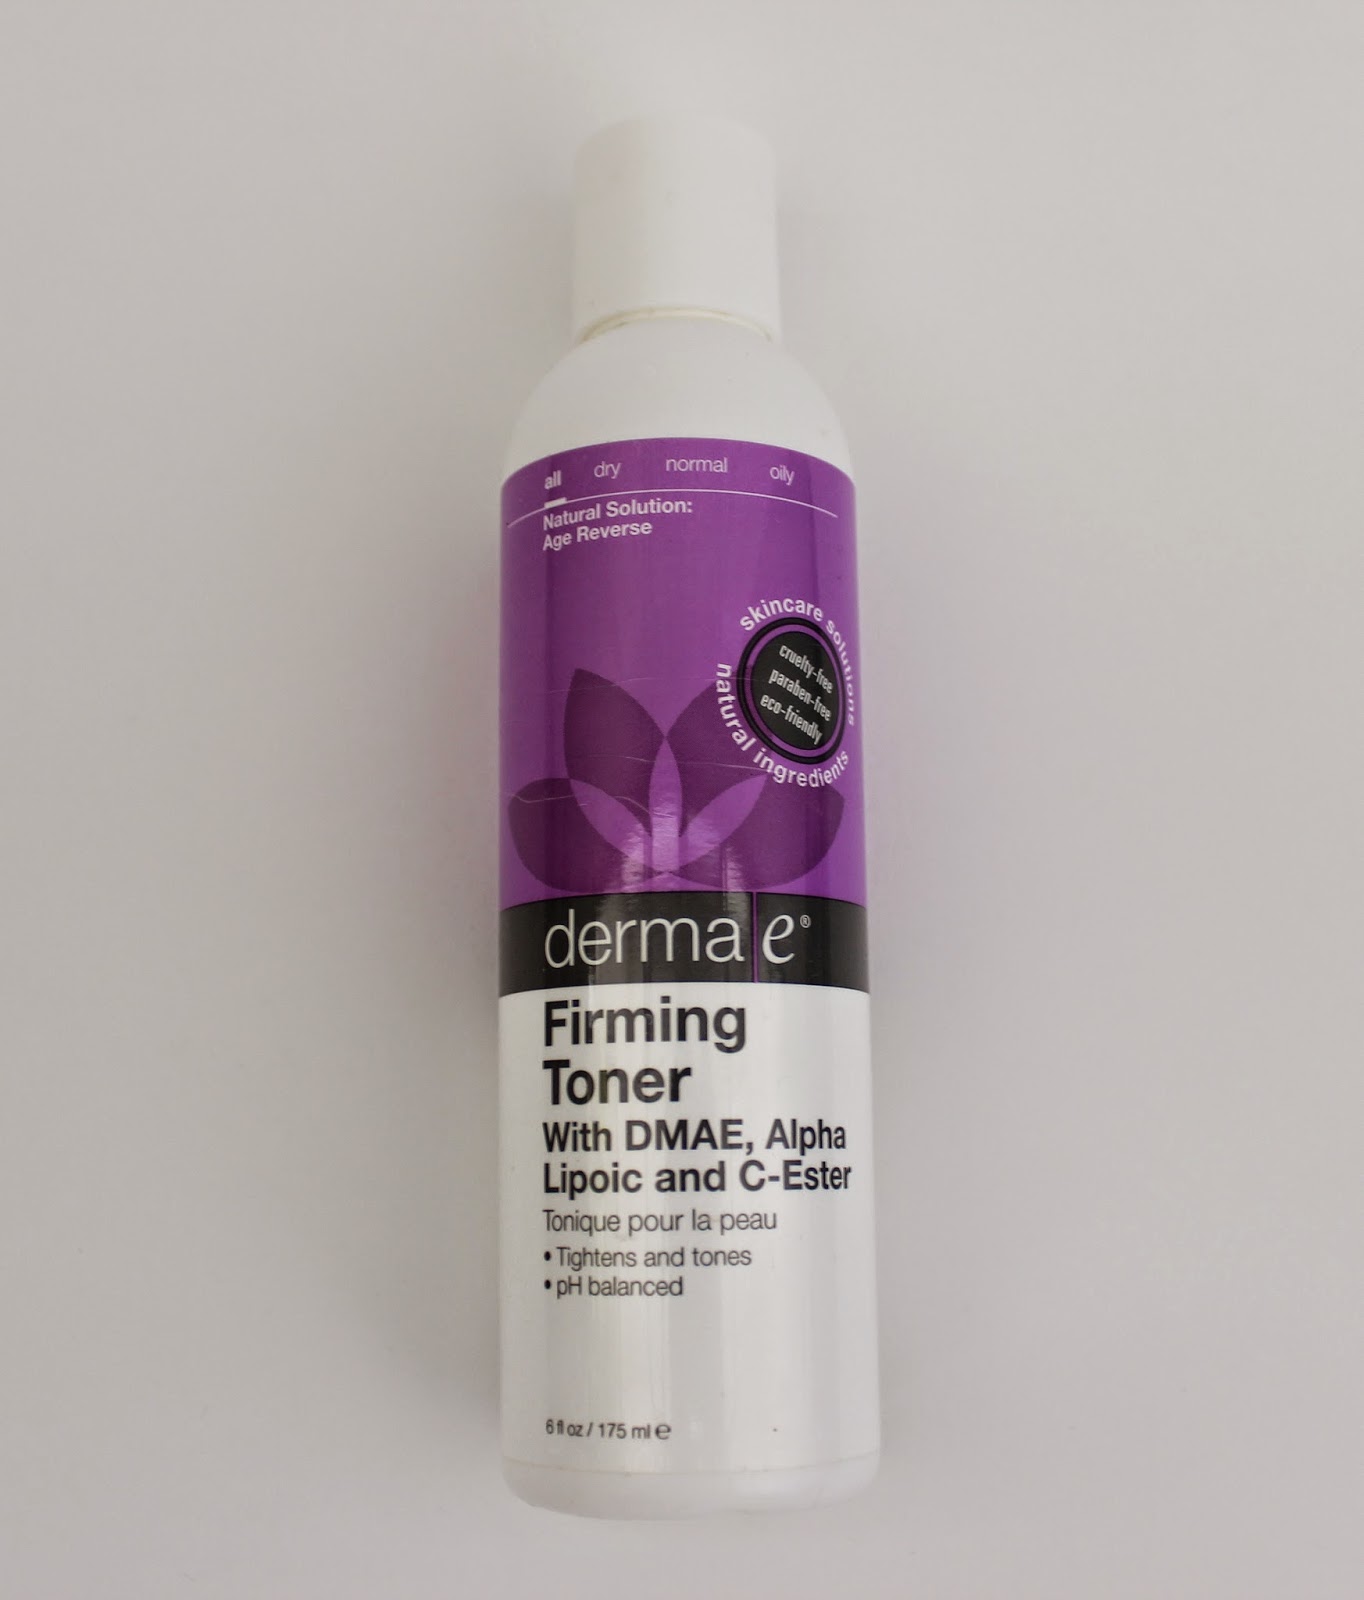 Derma E Firming Toner with DMAE Alpha Lipoic and C-Ester